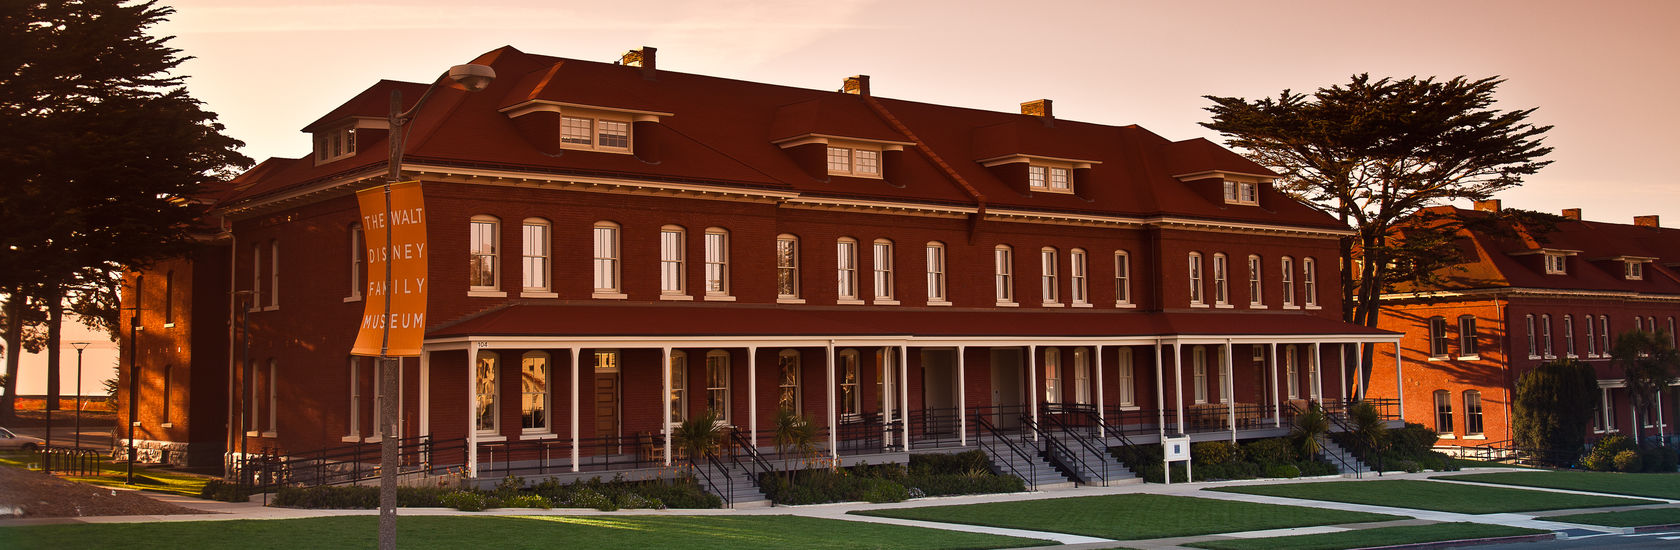 Museum &amp; Exhibition Tickets | The Walt Disney Family Museum